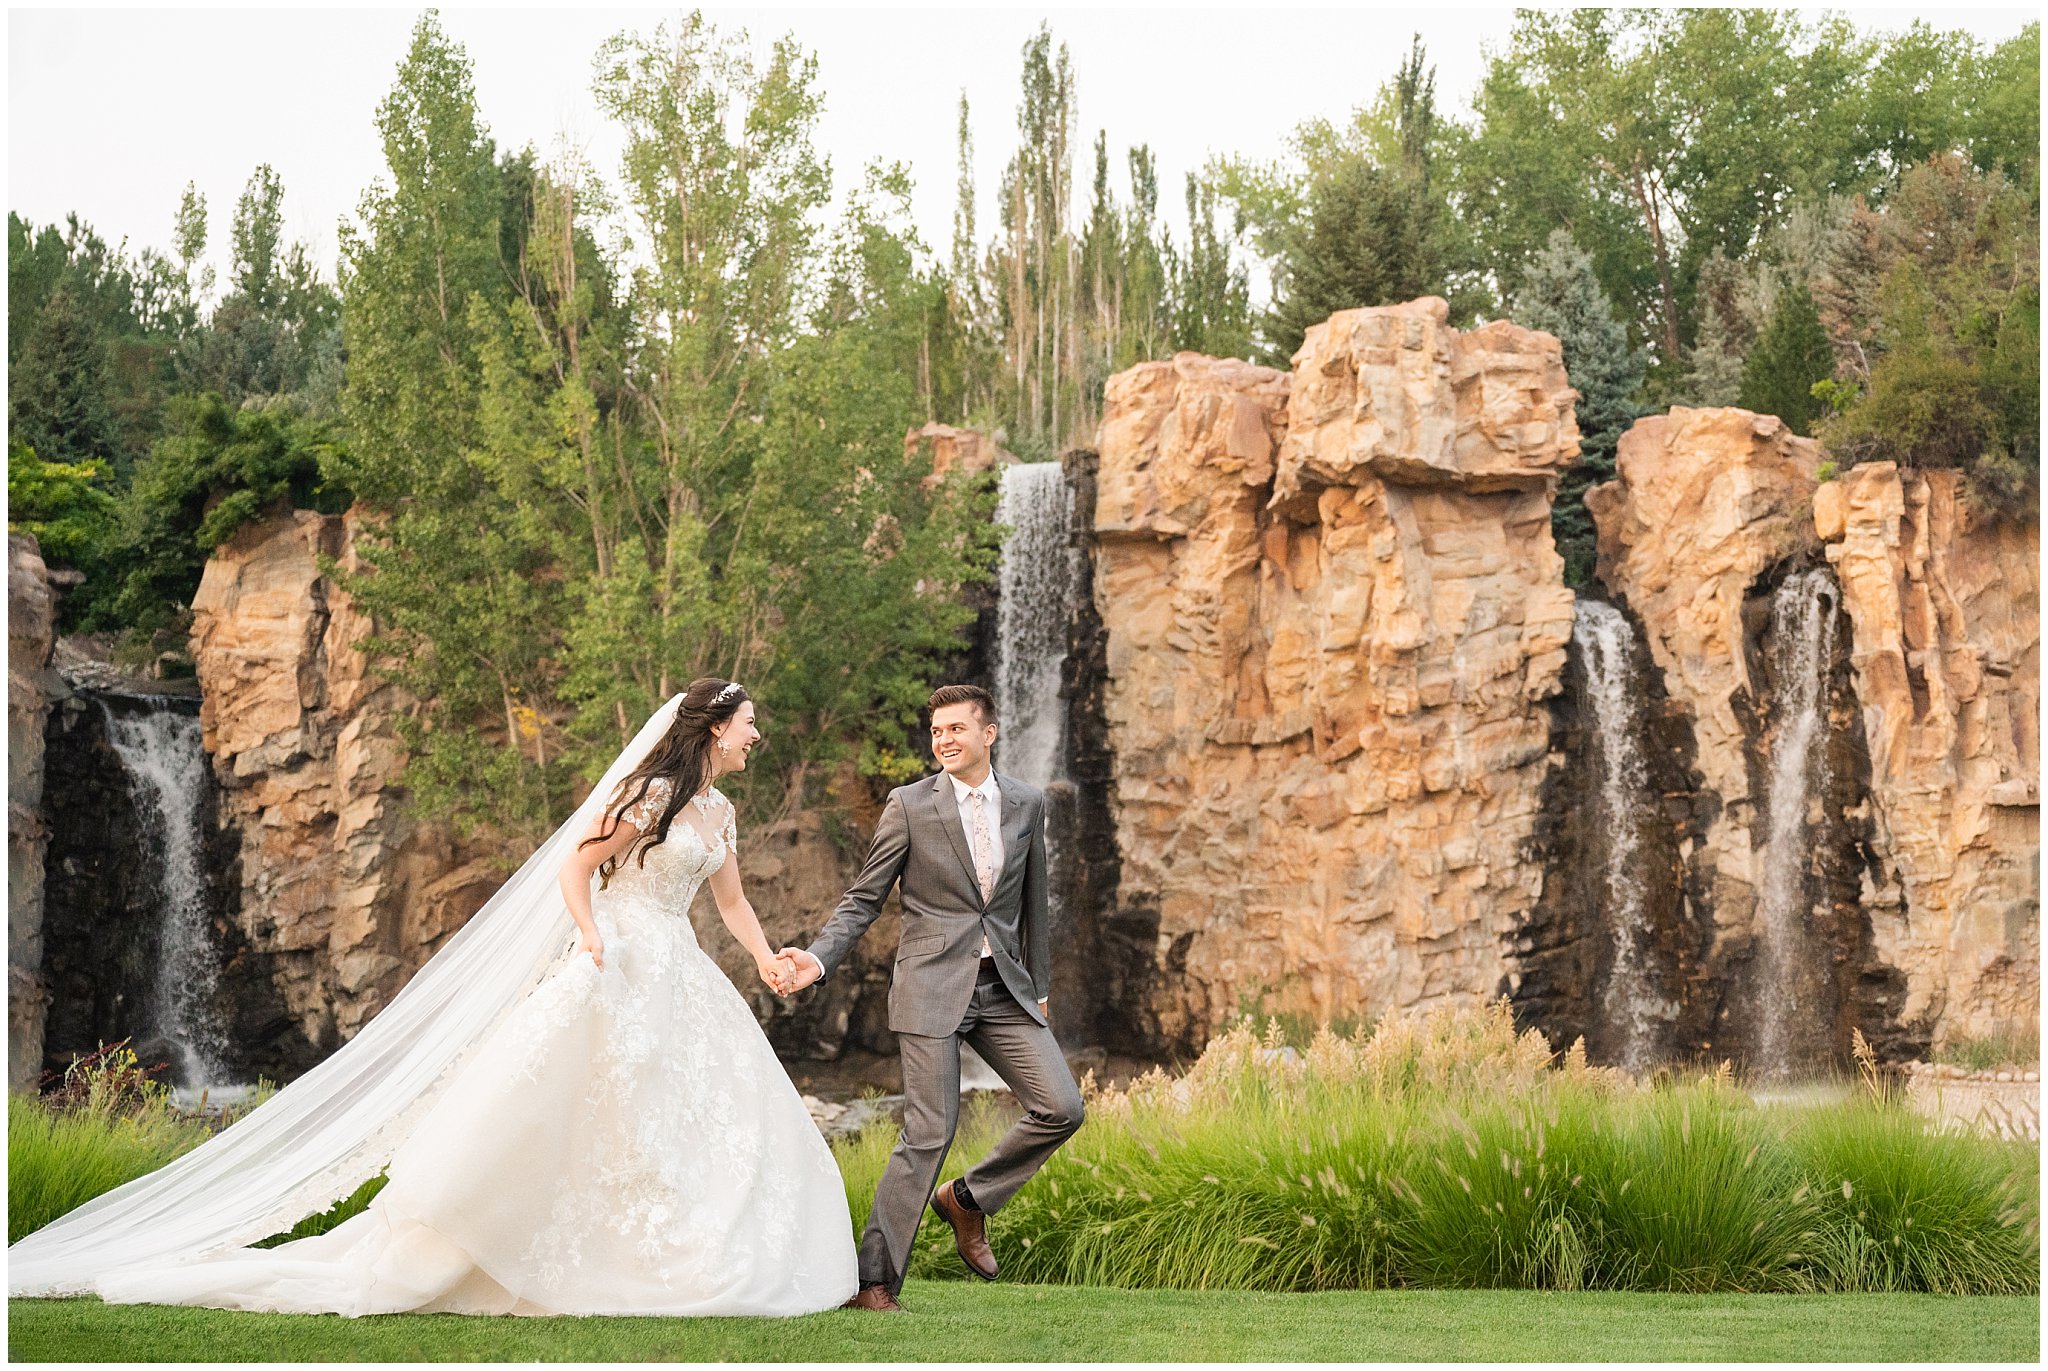 Bride and Groom in front of waterfalls during wedding portraits during the summer surrounded by flowers and gardens | Thanksgiving Point Ashton Garden Formal Session | Jessie and Dallin Photography